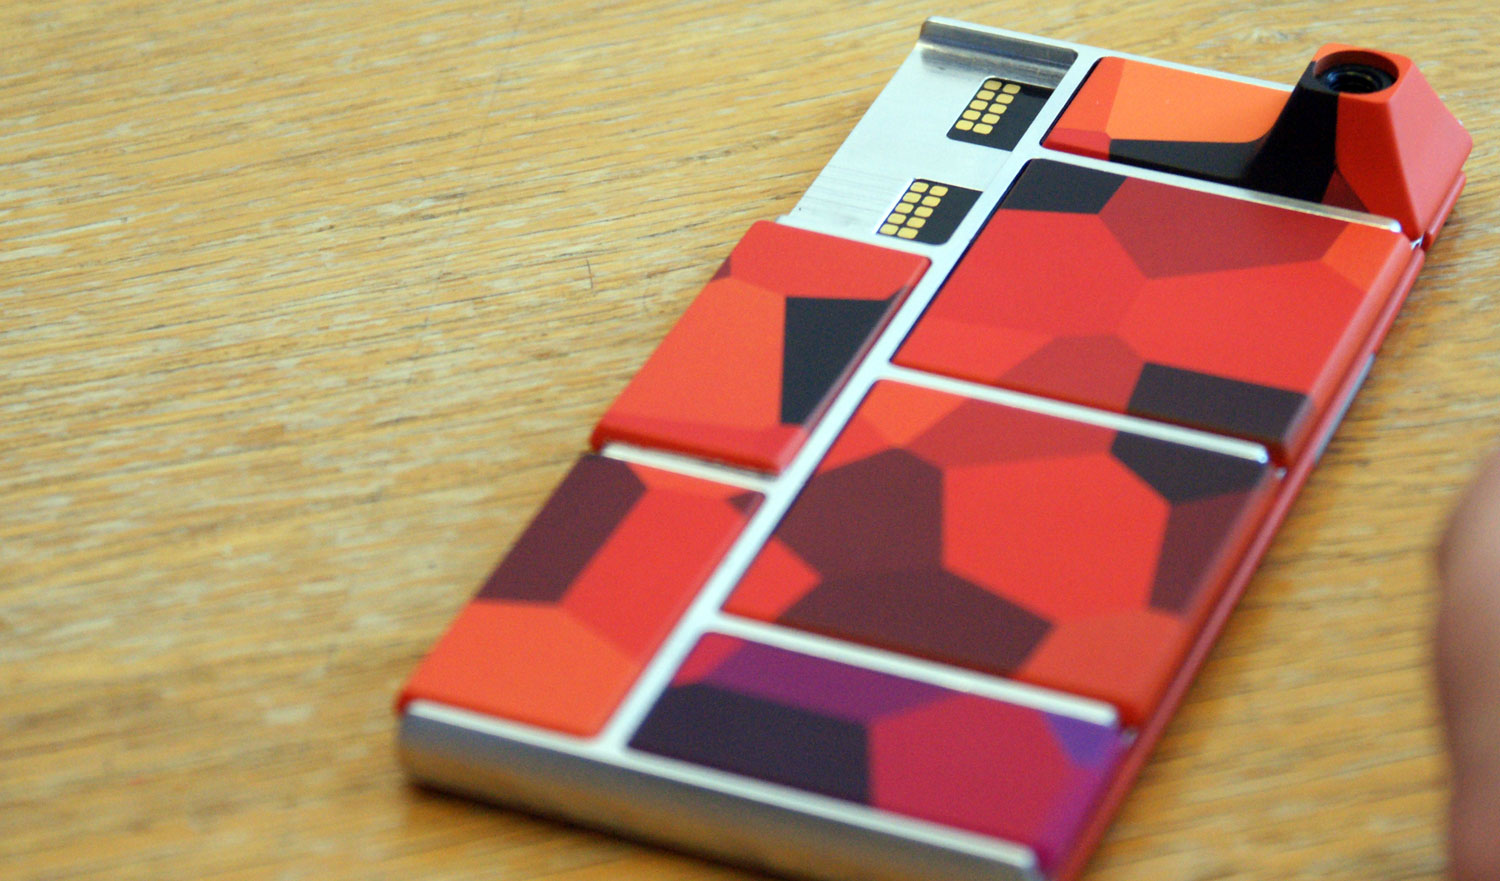 Mount Bank Indvending materiale 10 Things to Know About Google's Project Ara Smartphone